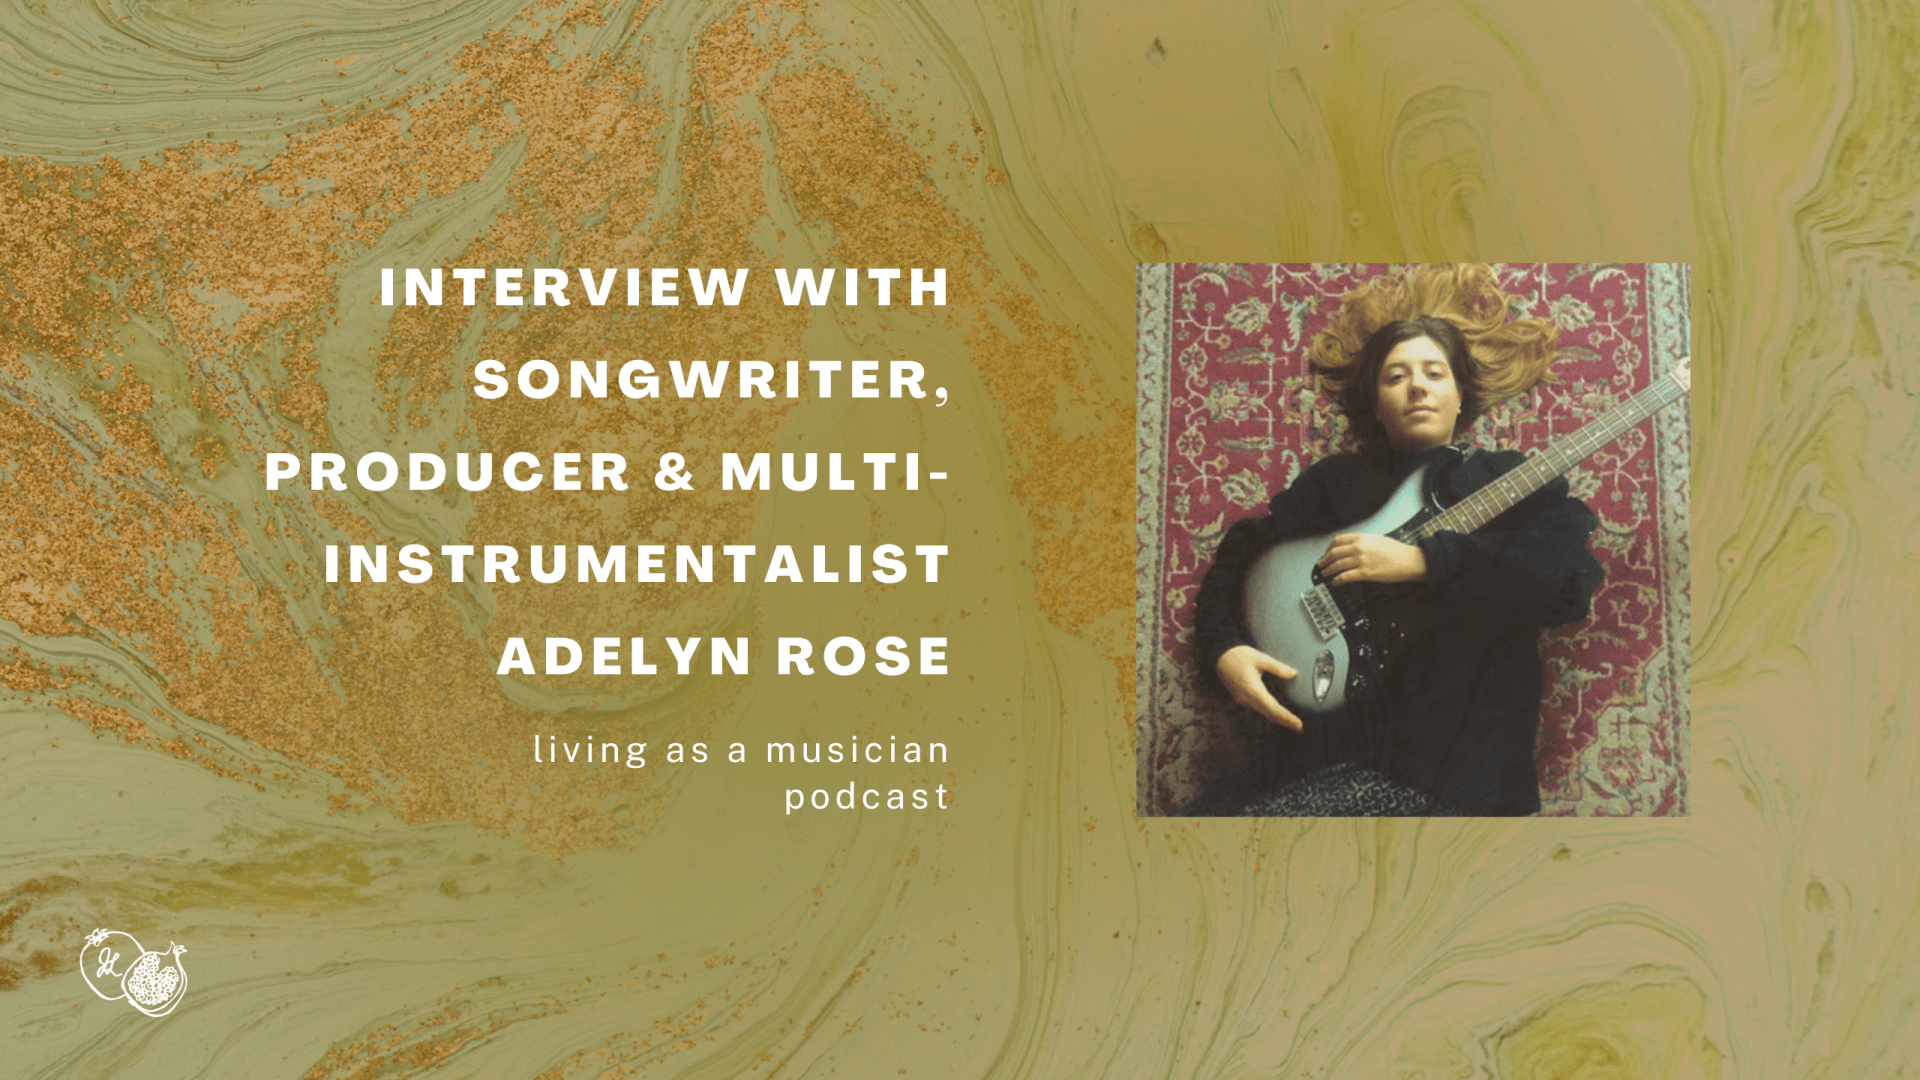 Interview with Songwriter, Producer & Multi-Instrumentalist Adelyn Rose